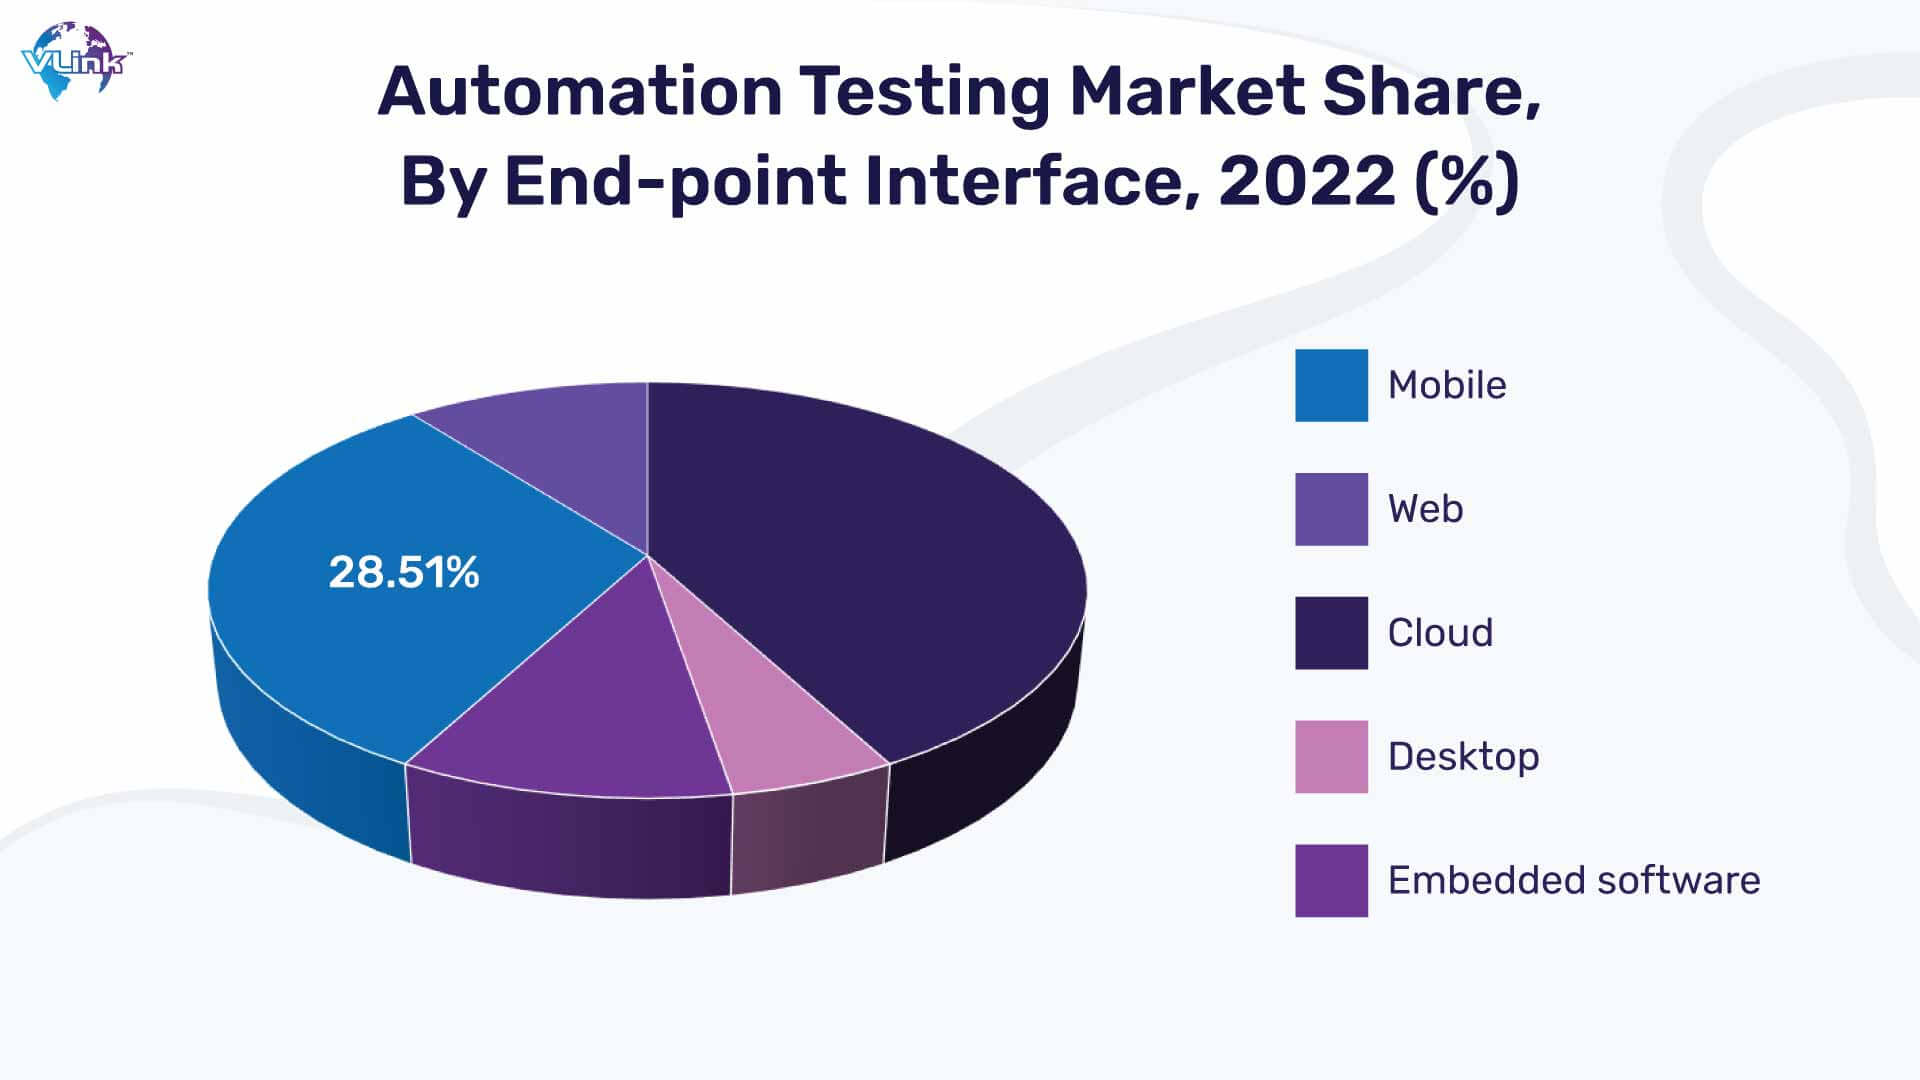 Automation testing market share by end-point interface